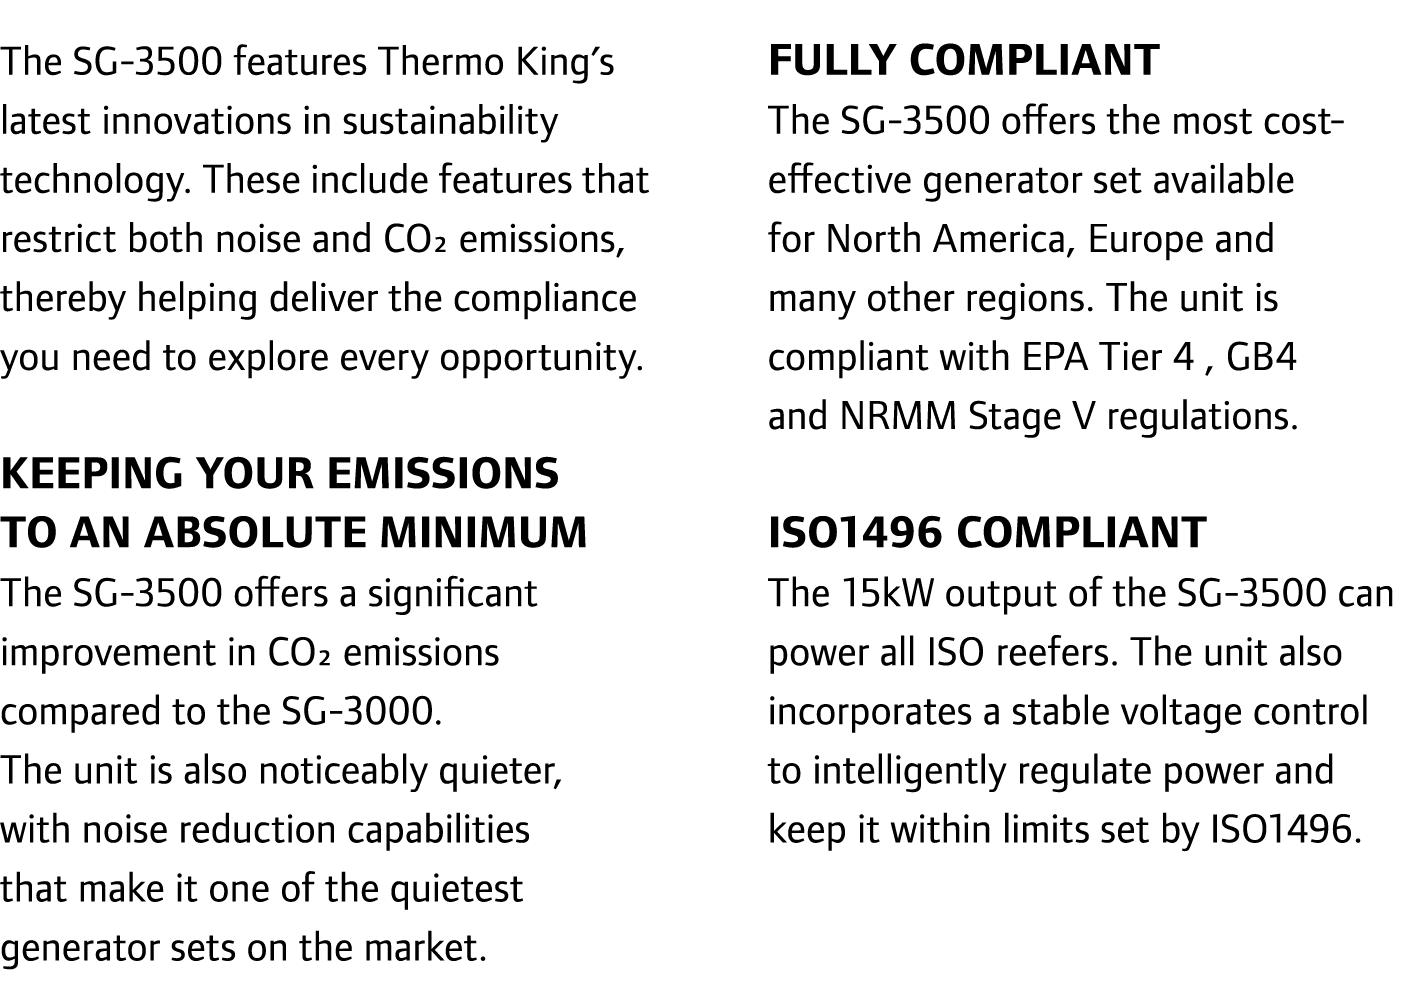 The SG-3500 features Thermo King’s latest innovations in sustainability technology. These include features that restr...